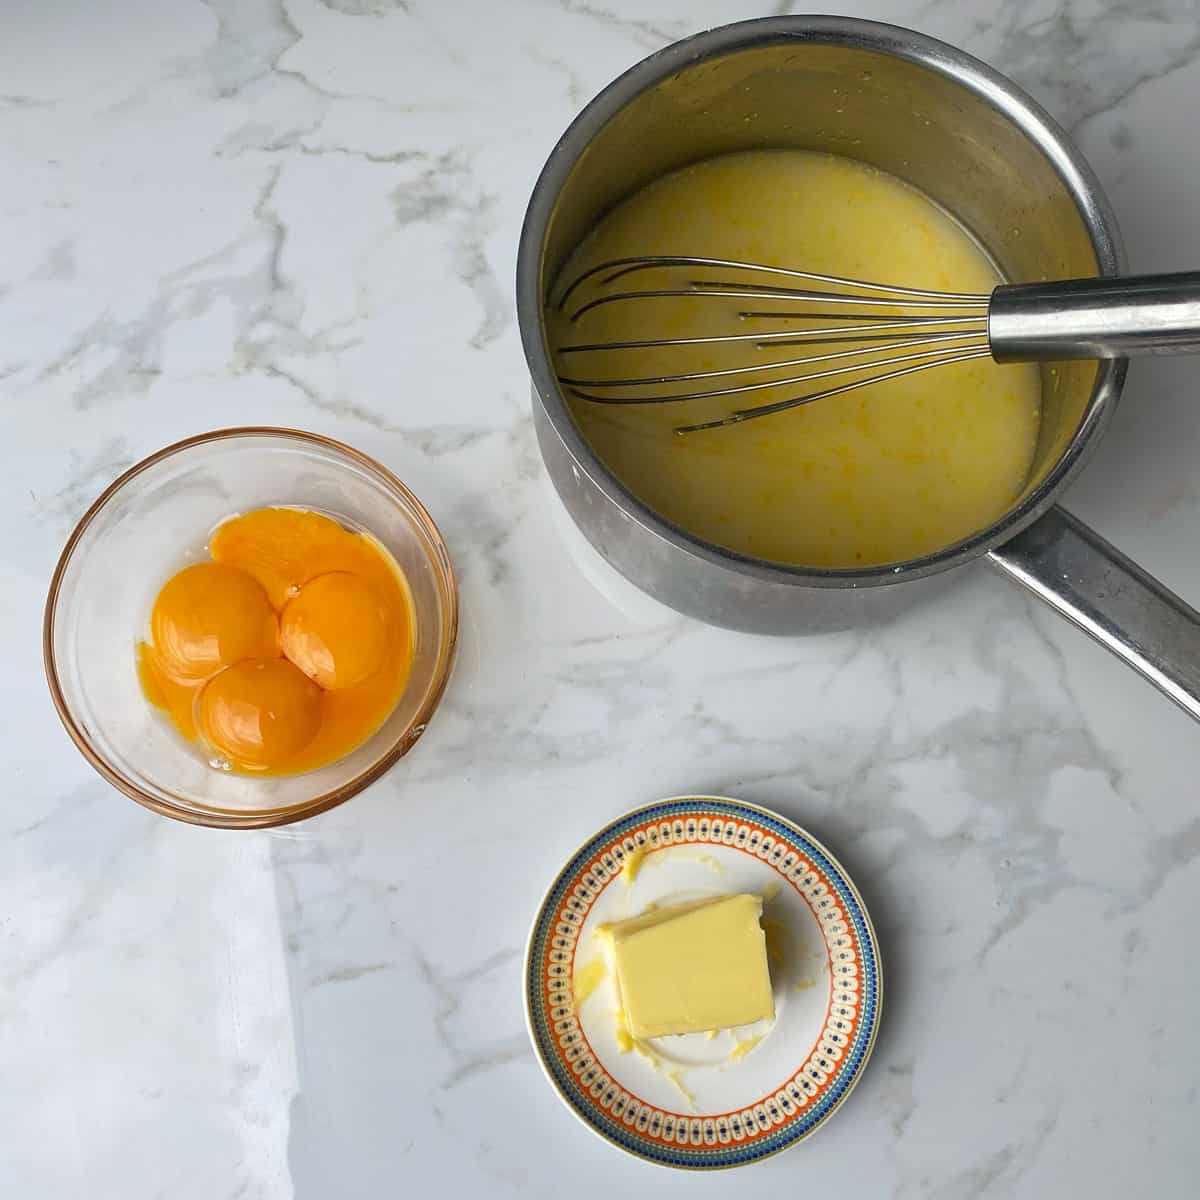 Egg yolks in a bowl, butter on a plate and a lemon mix in a saucepan all on a bench.